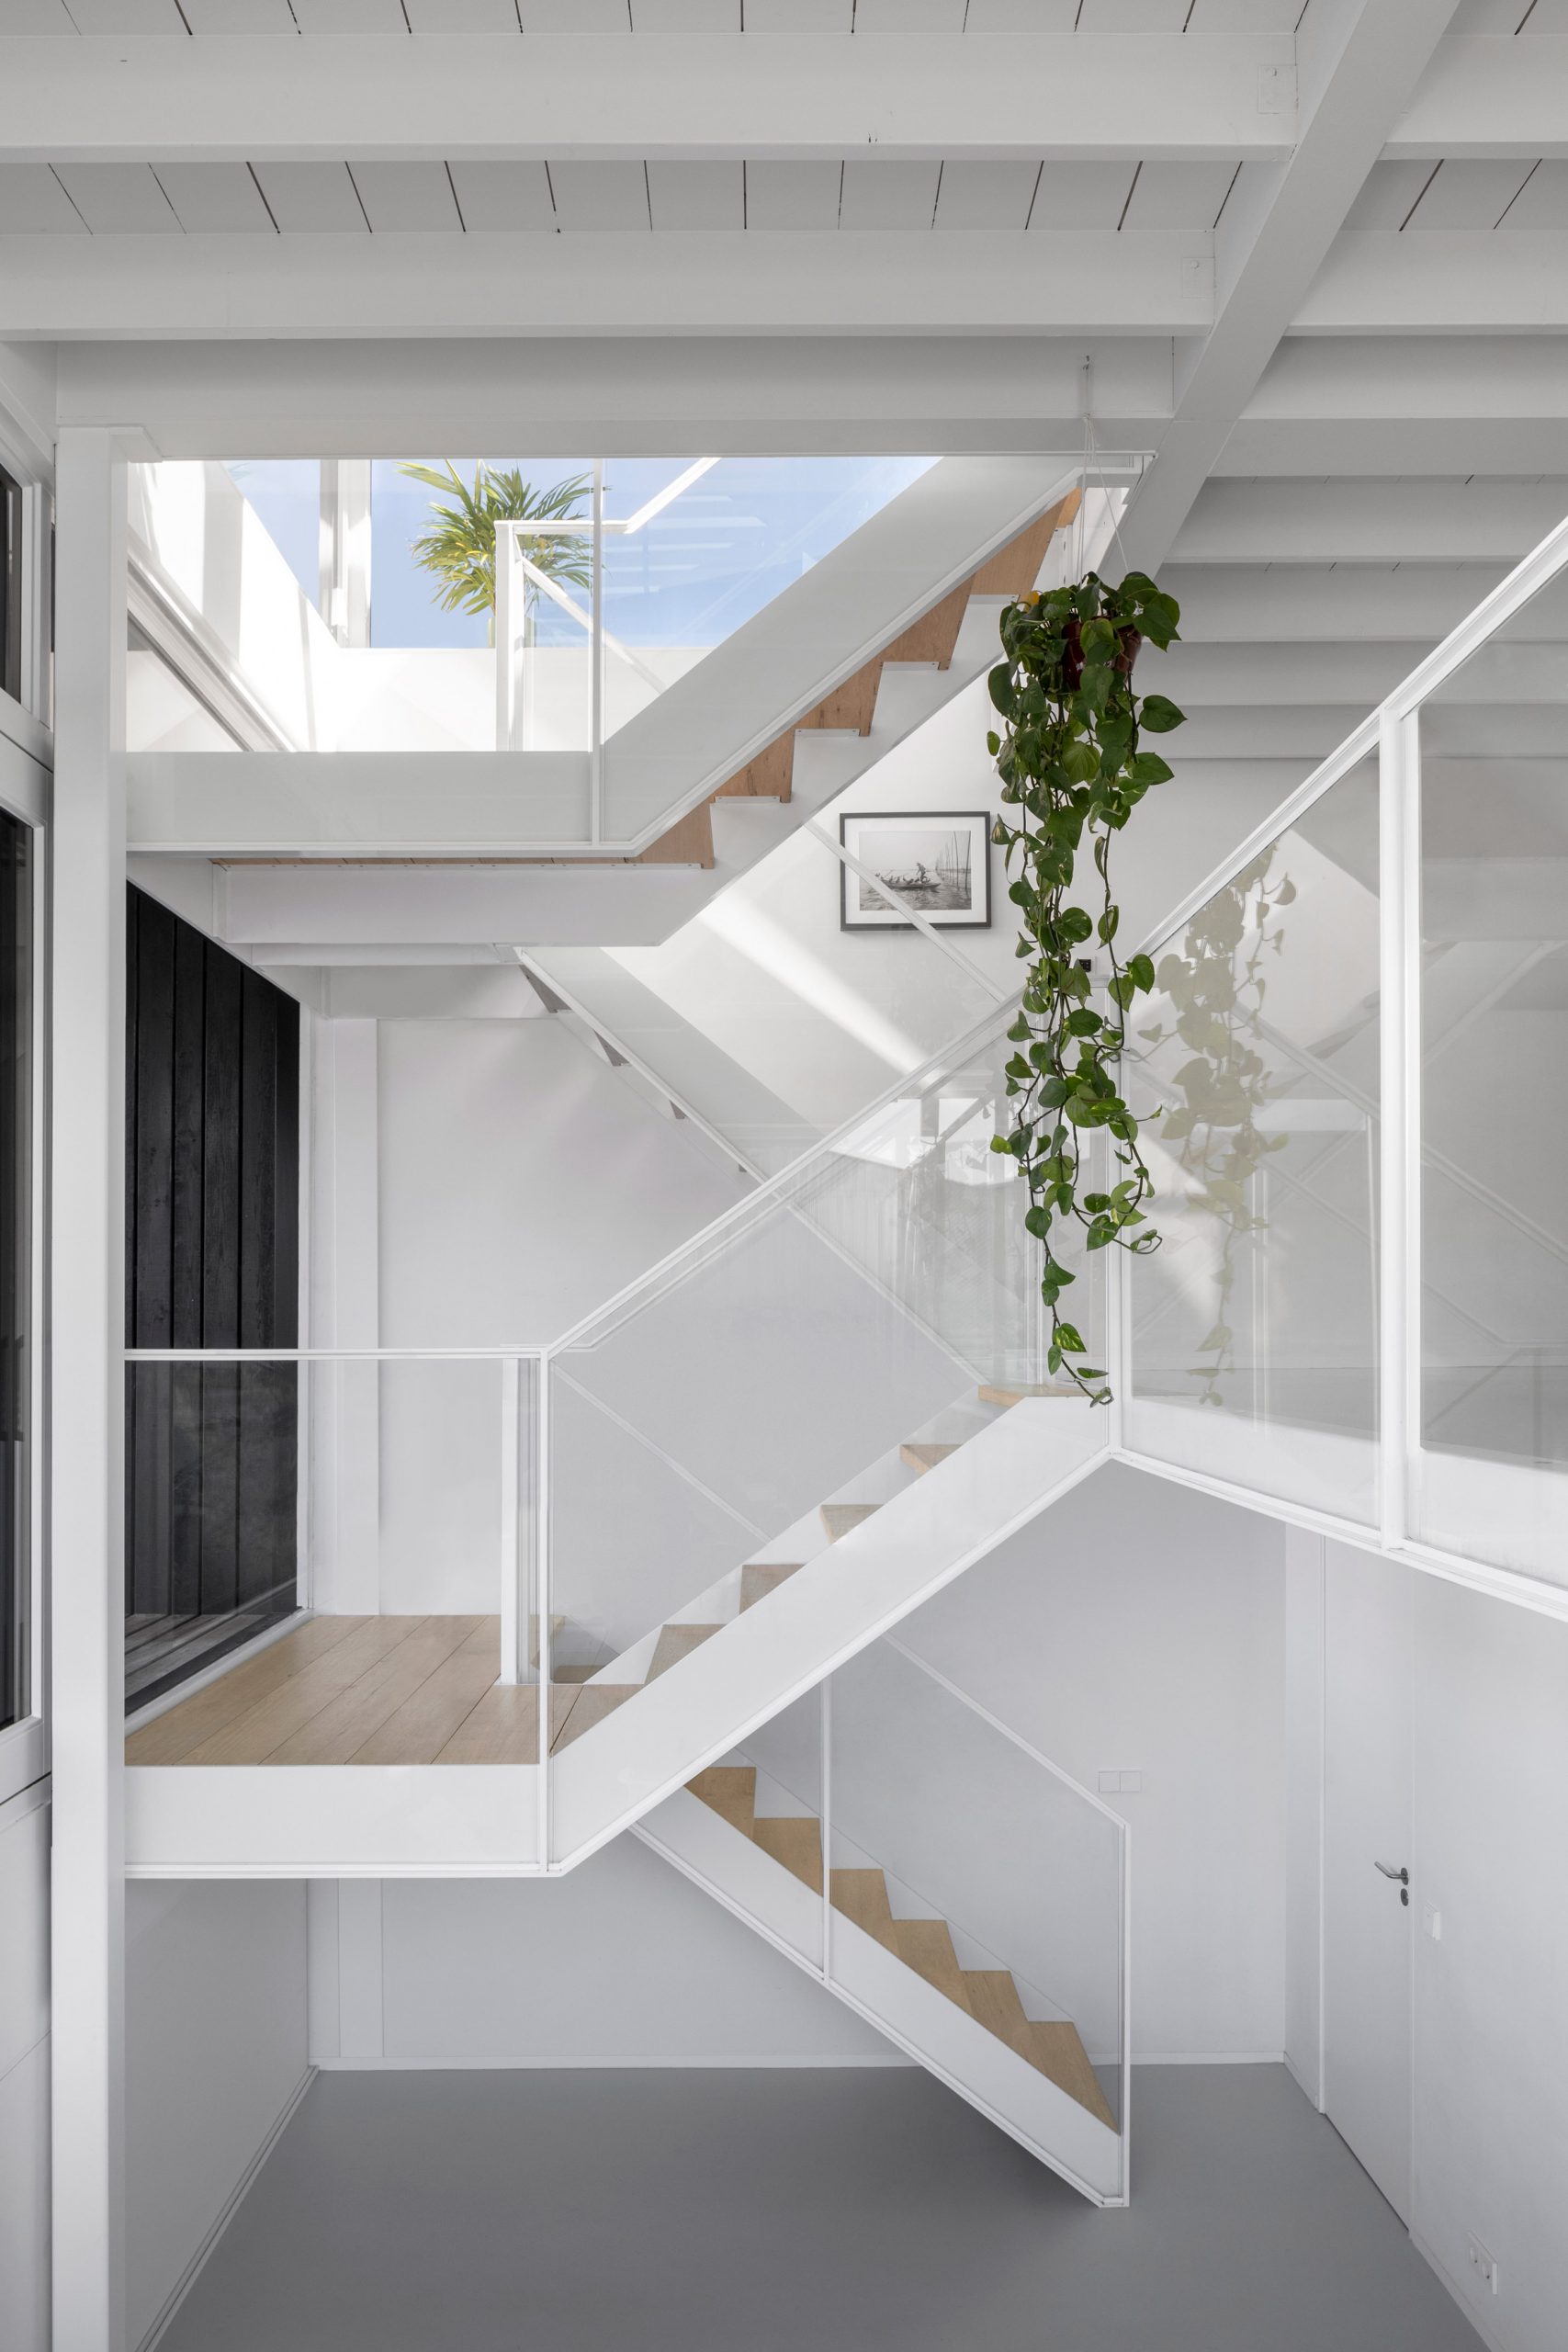 The staircase inside the floating house by i29